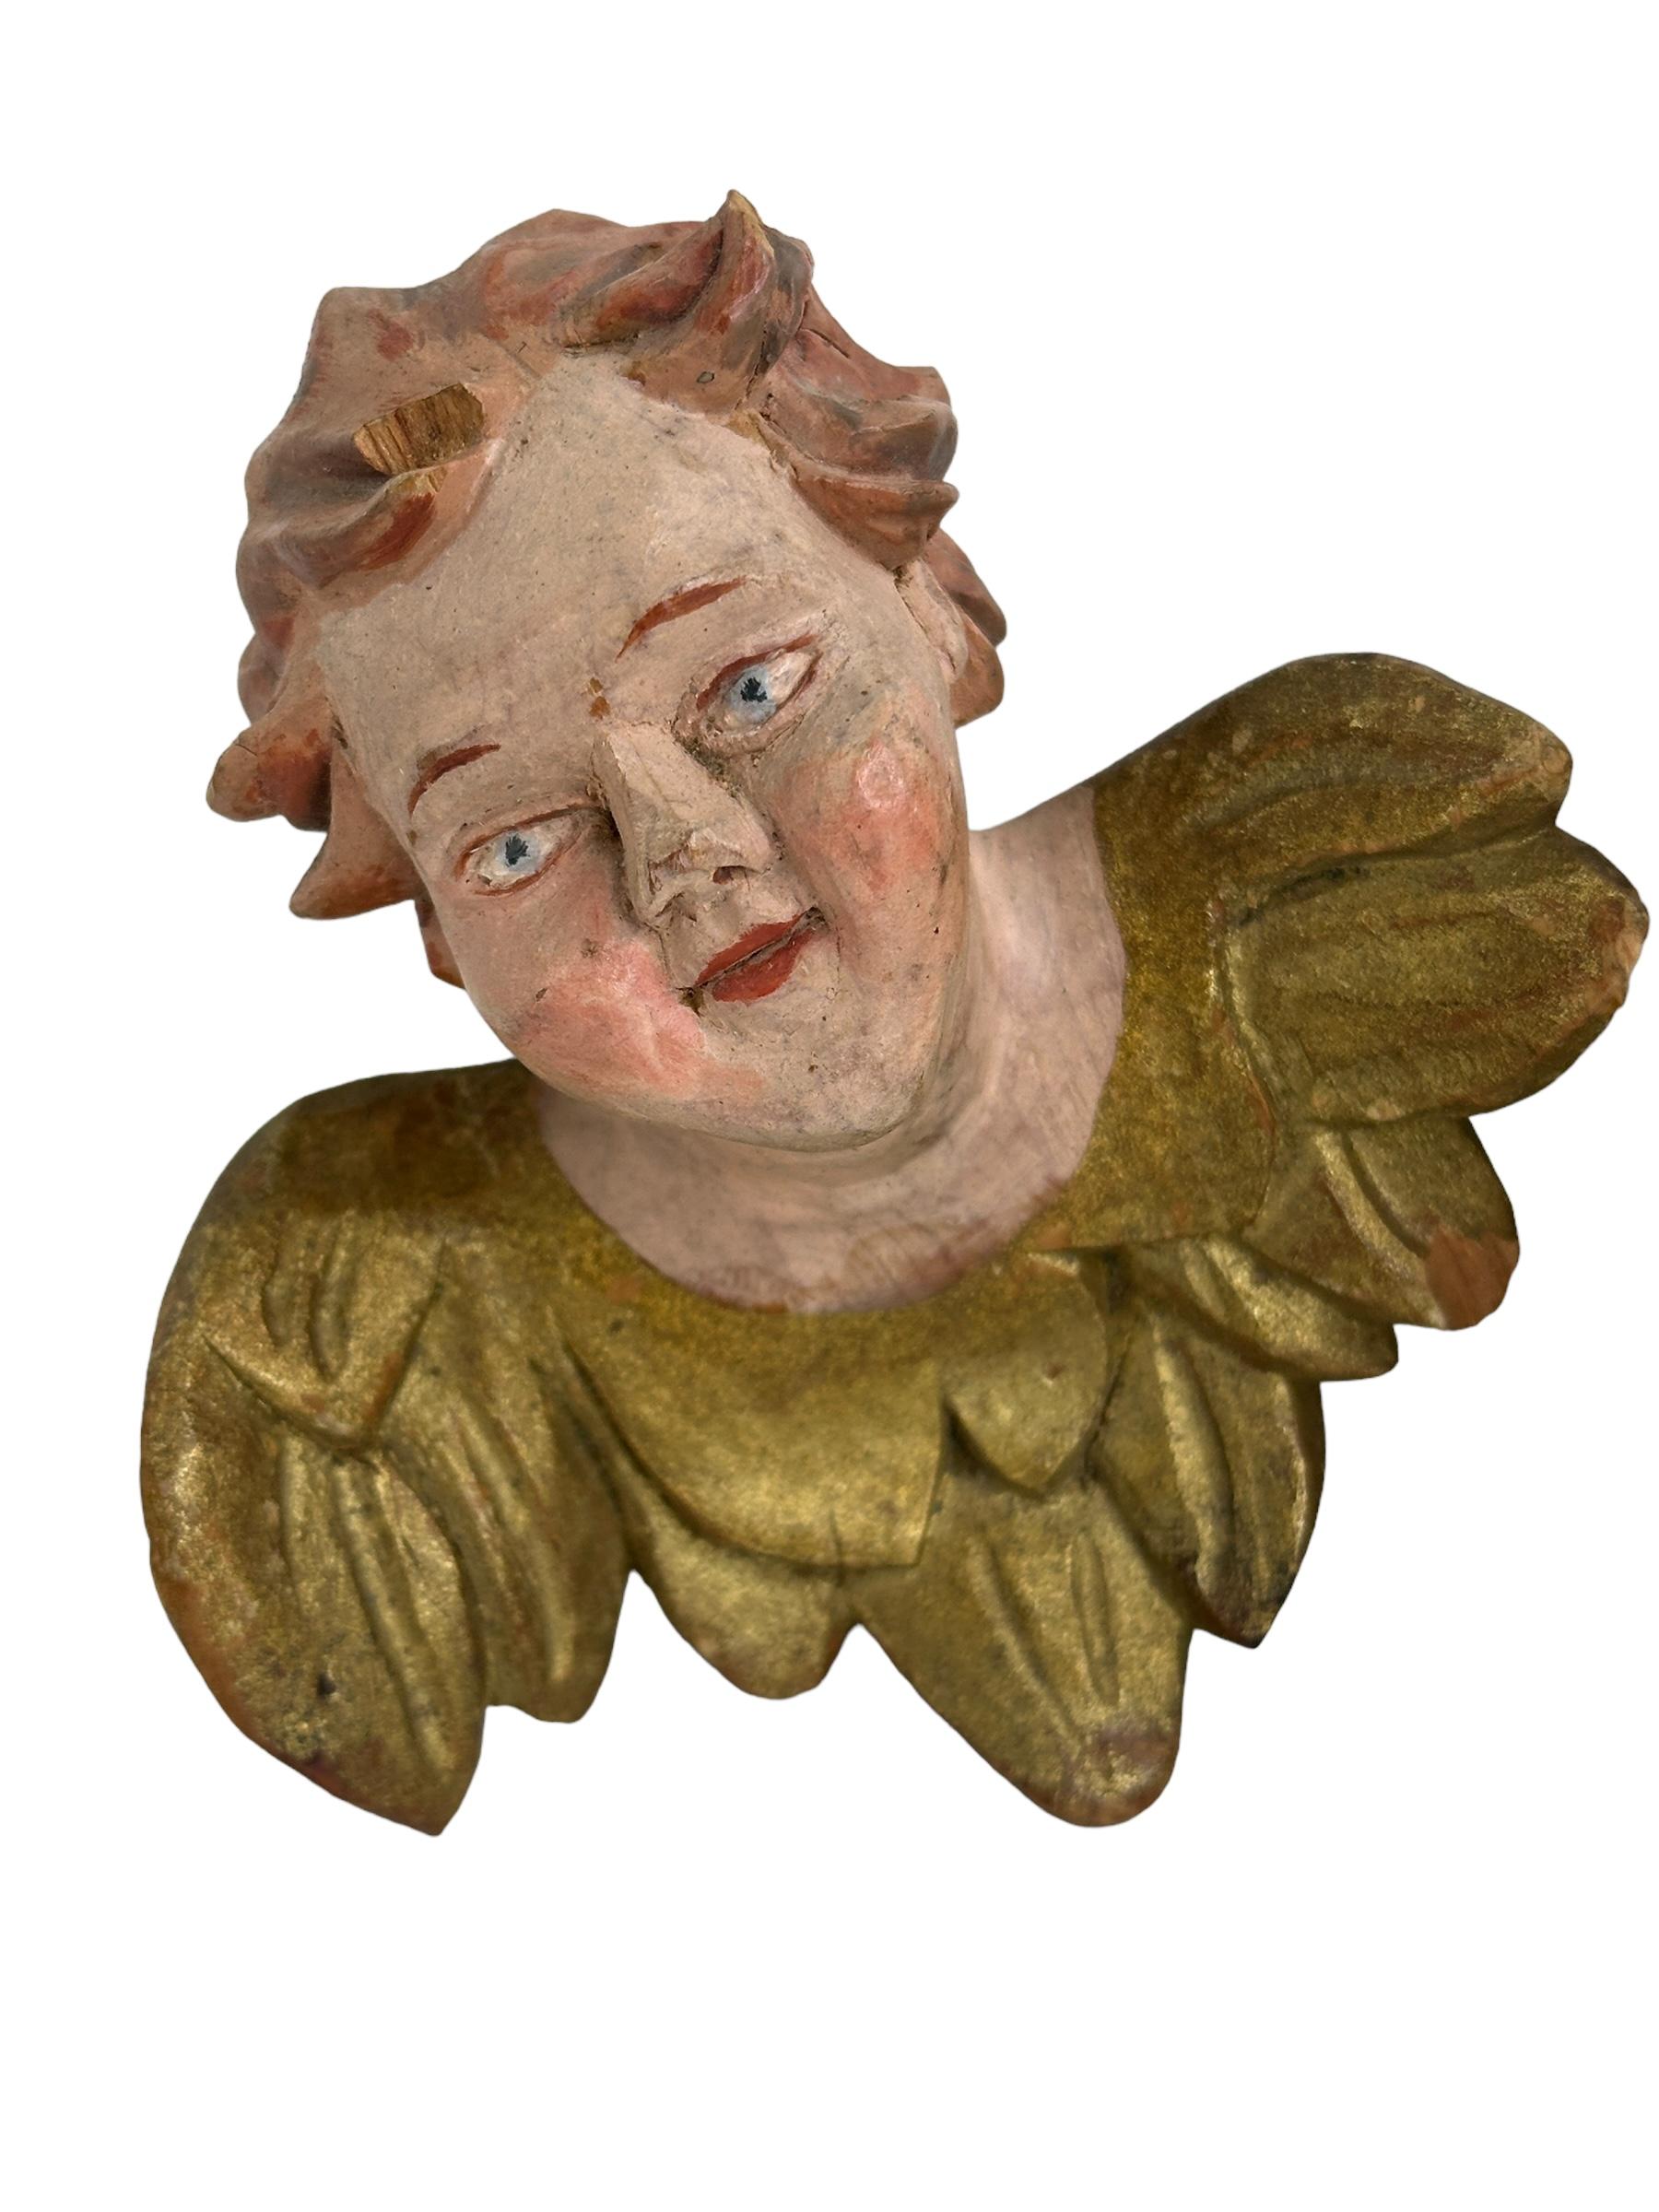 A pair beautiful hand carved and hand painted cherub angel Heads, found at an estate sale in Nuremberg, Germany. Made by a woodcarver in the Oberammergau area, this area is well-known for their wood carvings. The size given in the dimensions section